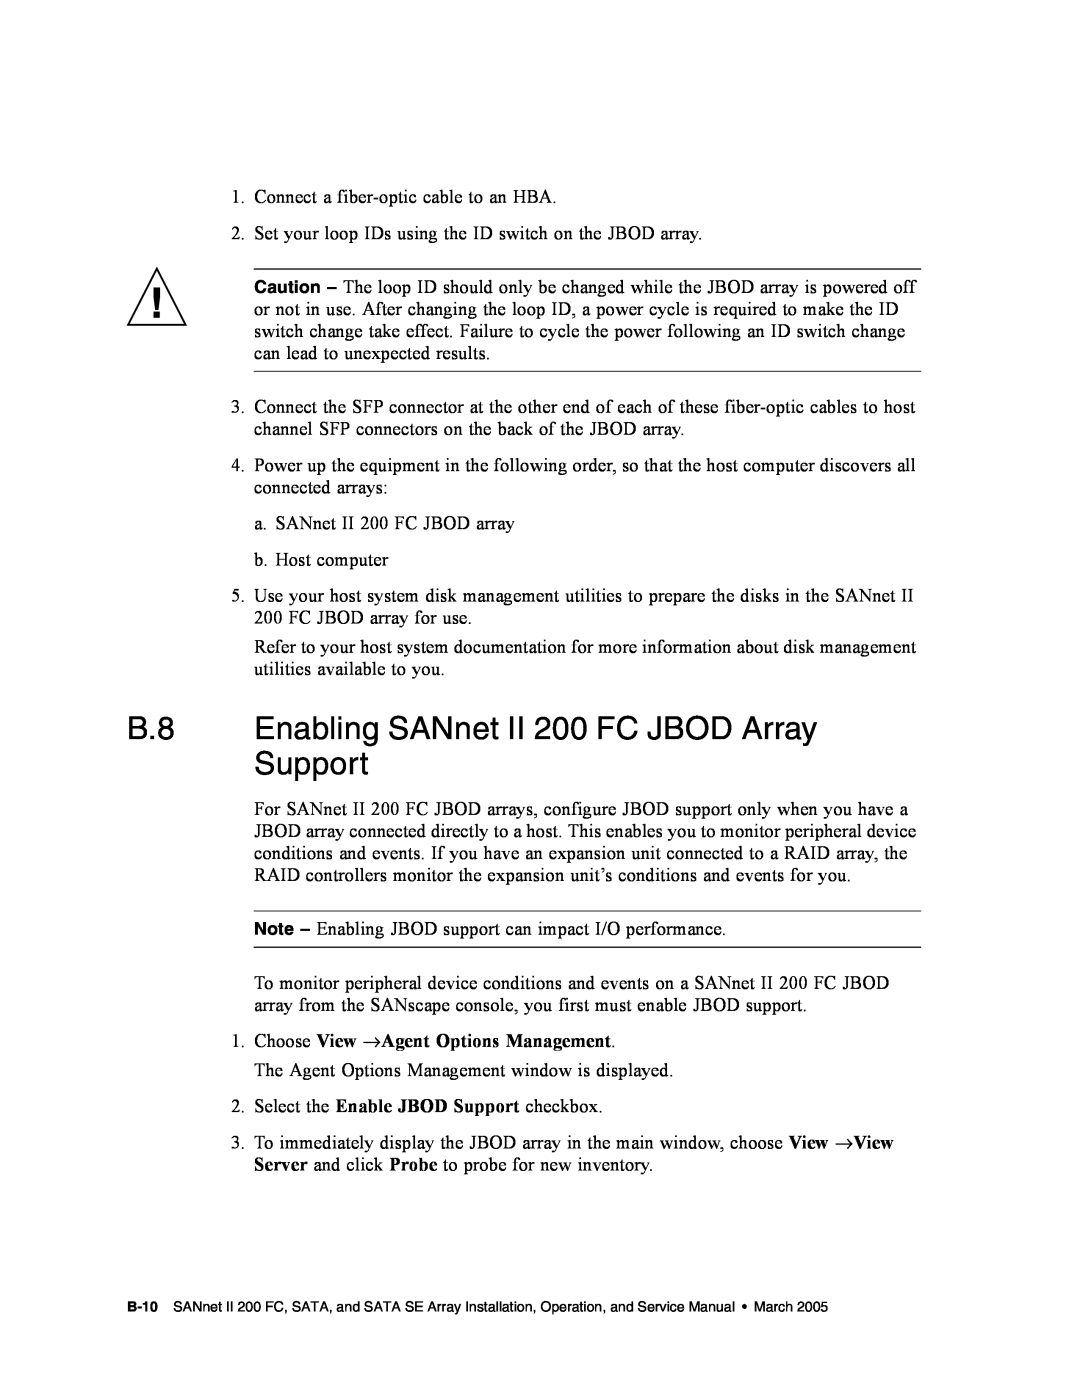 Dot Hill Systems service manual B.8 Enabling SANnet II 200 FC JBOD Array Support, Choose View →Agent Options Management 